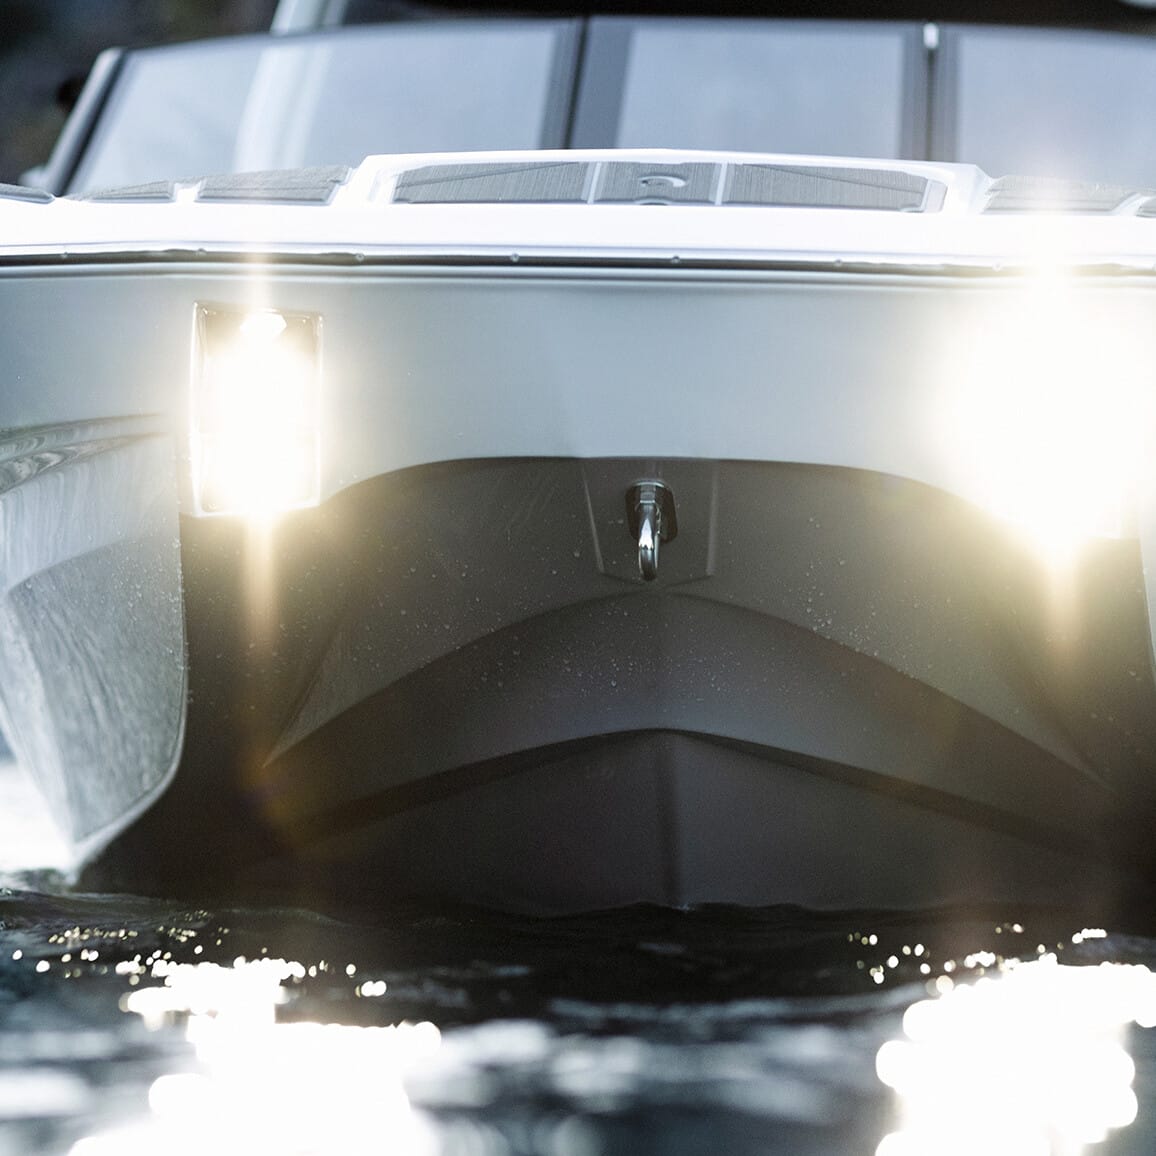 A close-up of the front of a boat with its headlights on, floating on a body of water.